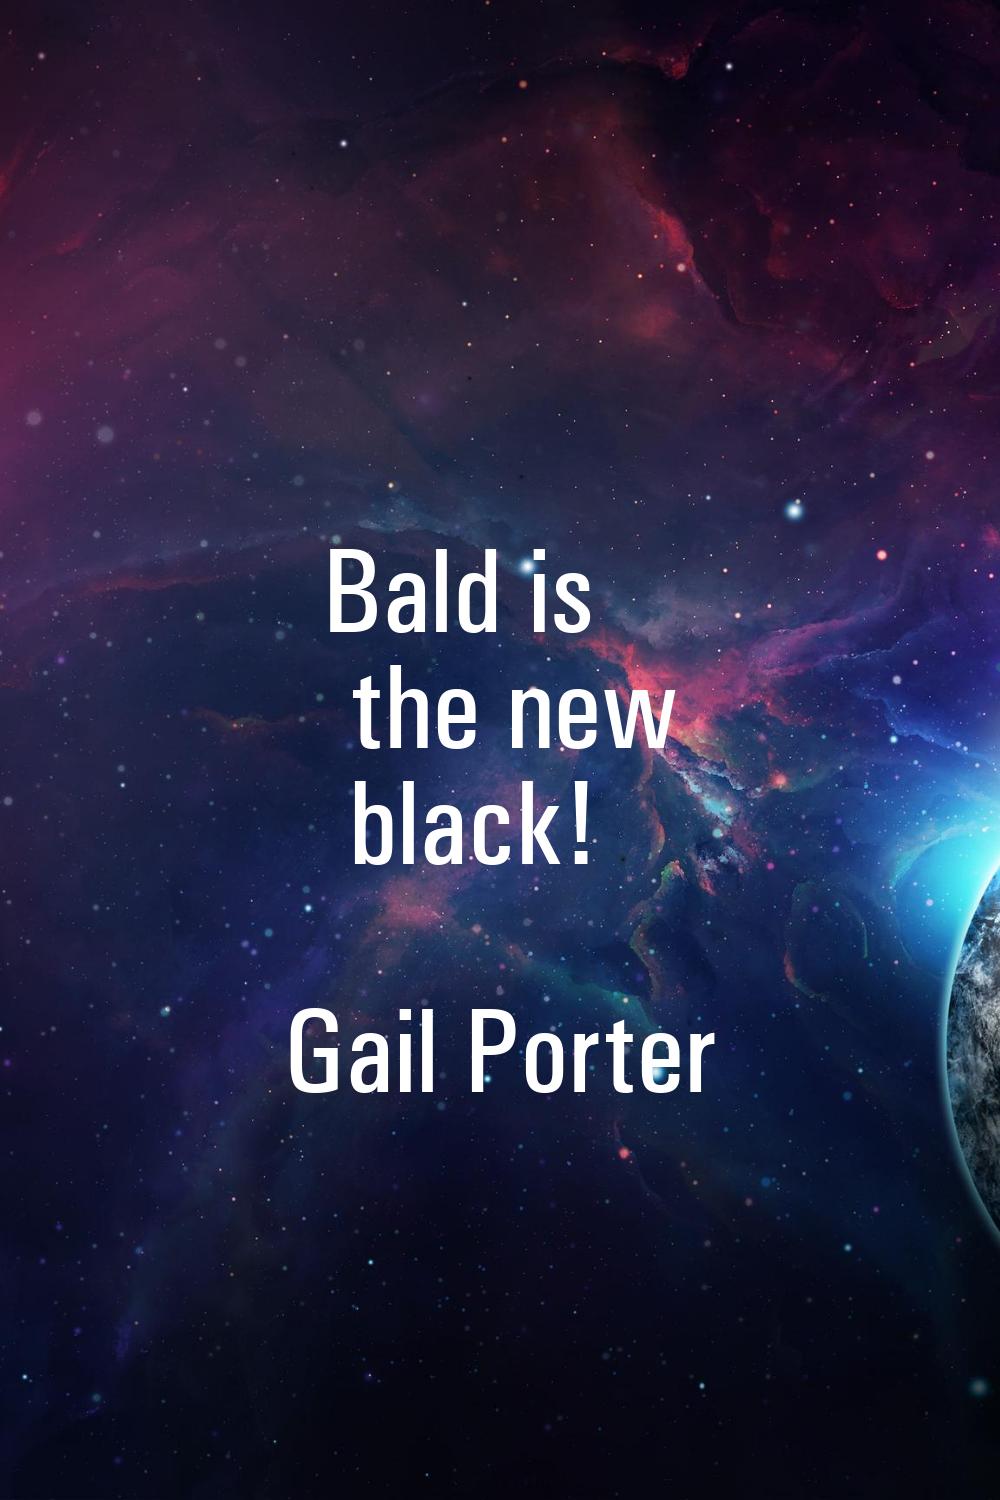 Bald is the new black!